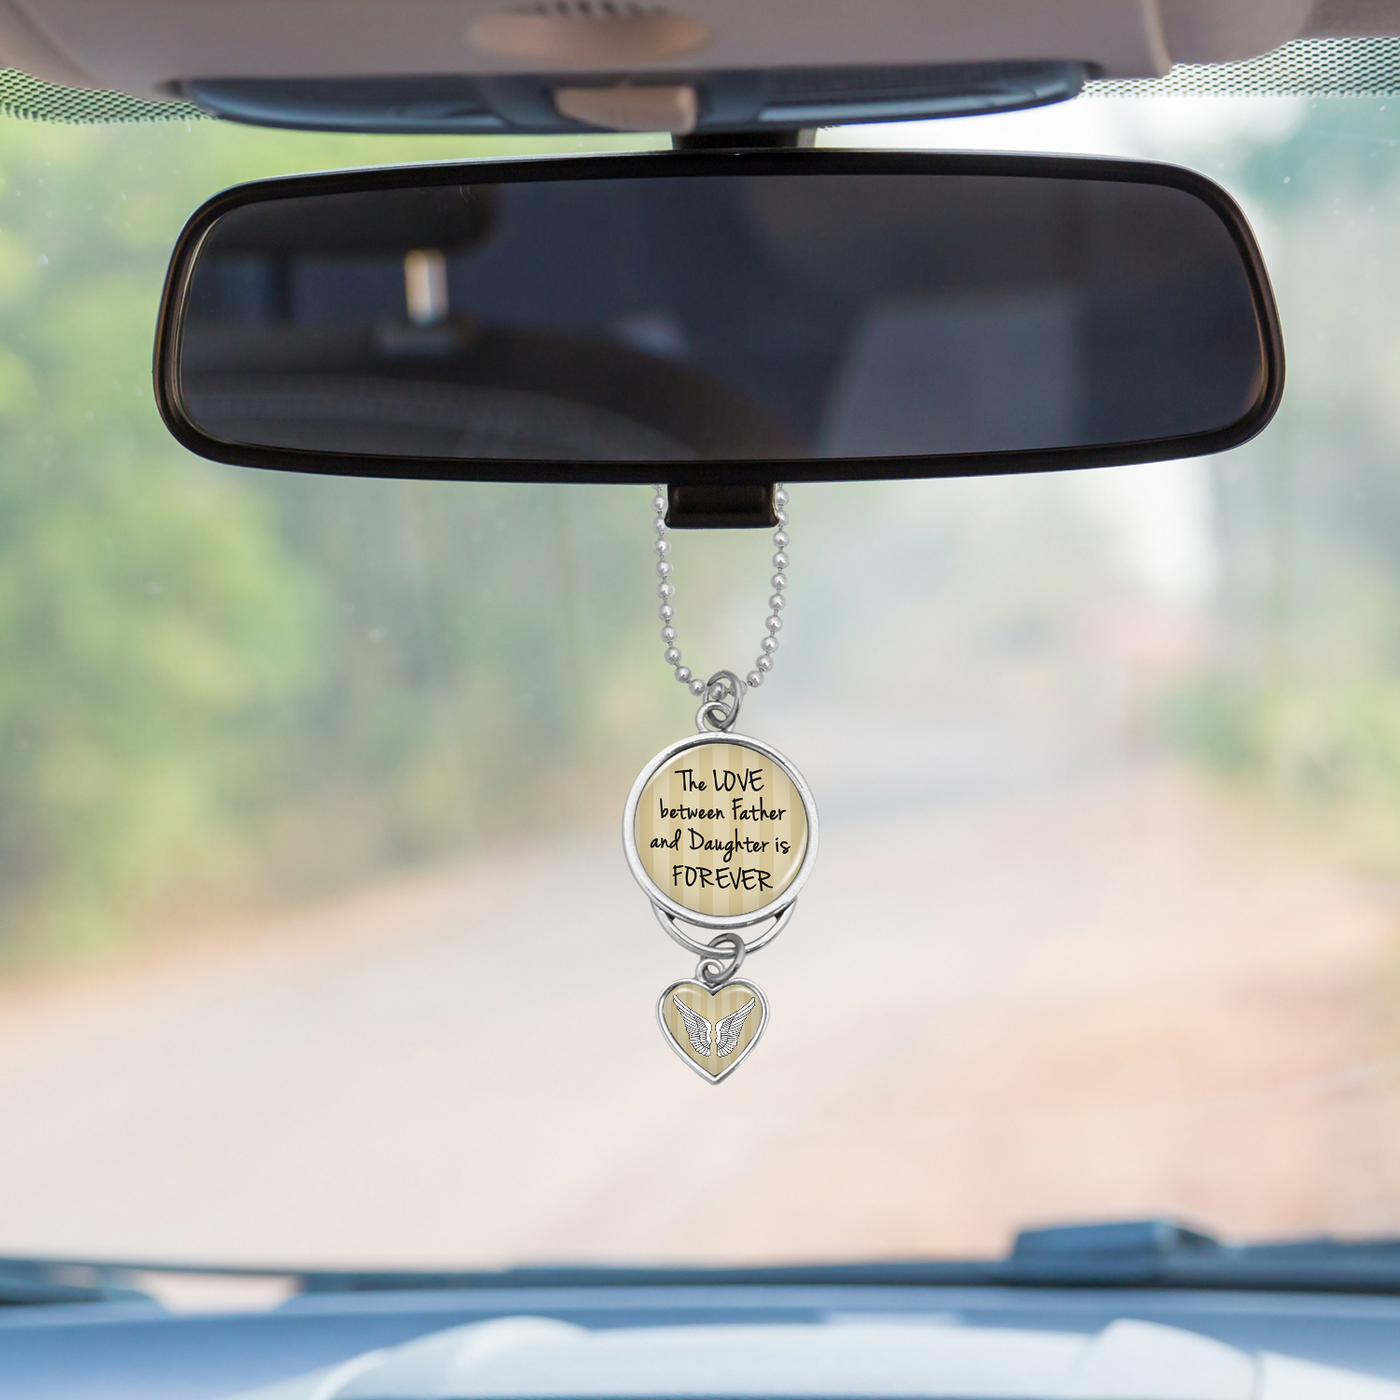 Love Between Father And Daughter Rearview Mirror Charm